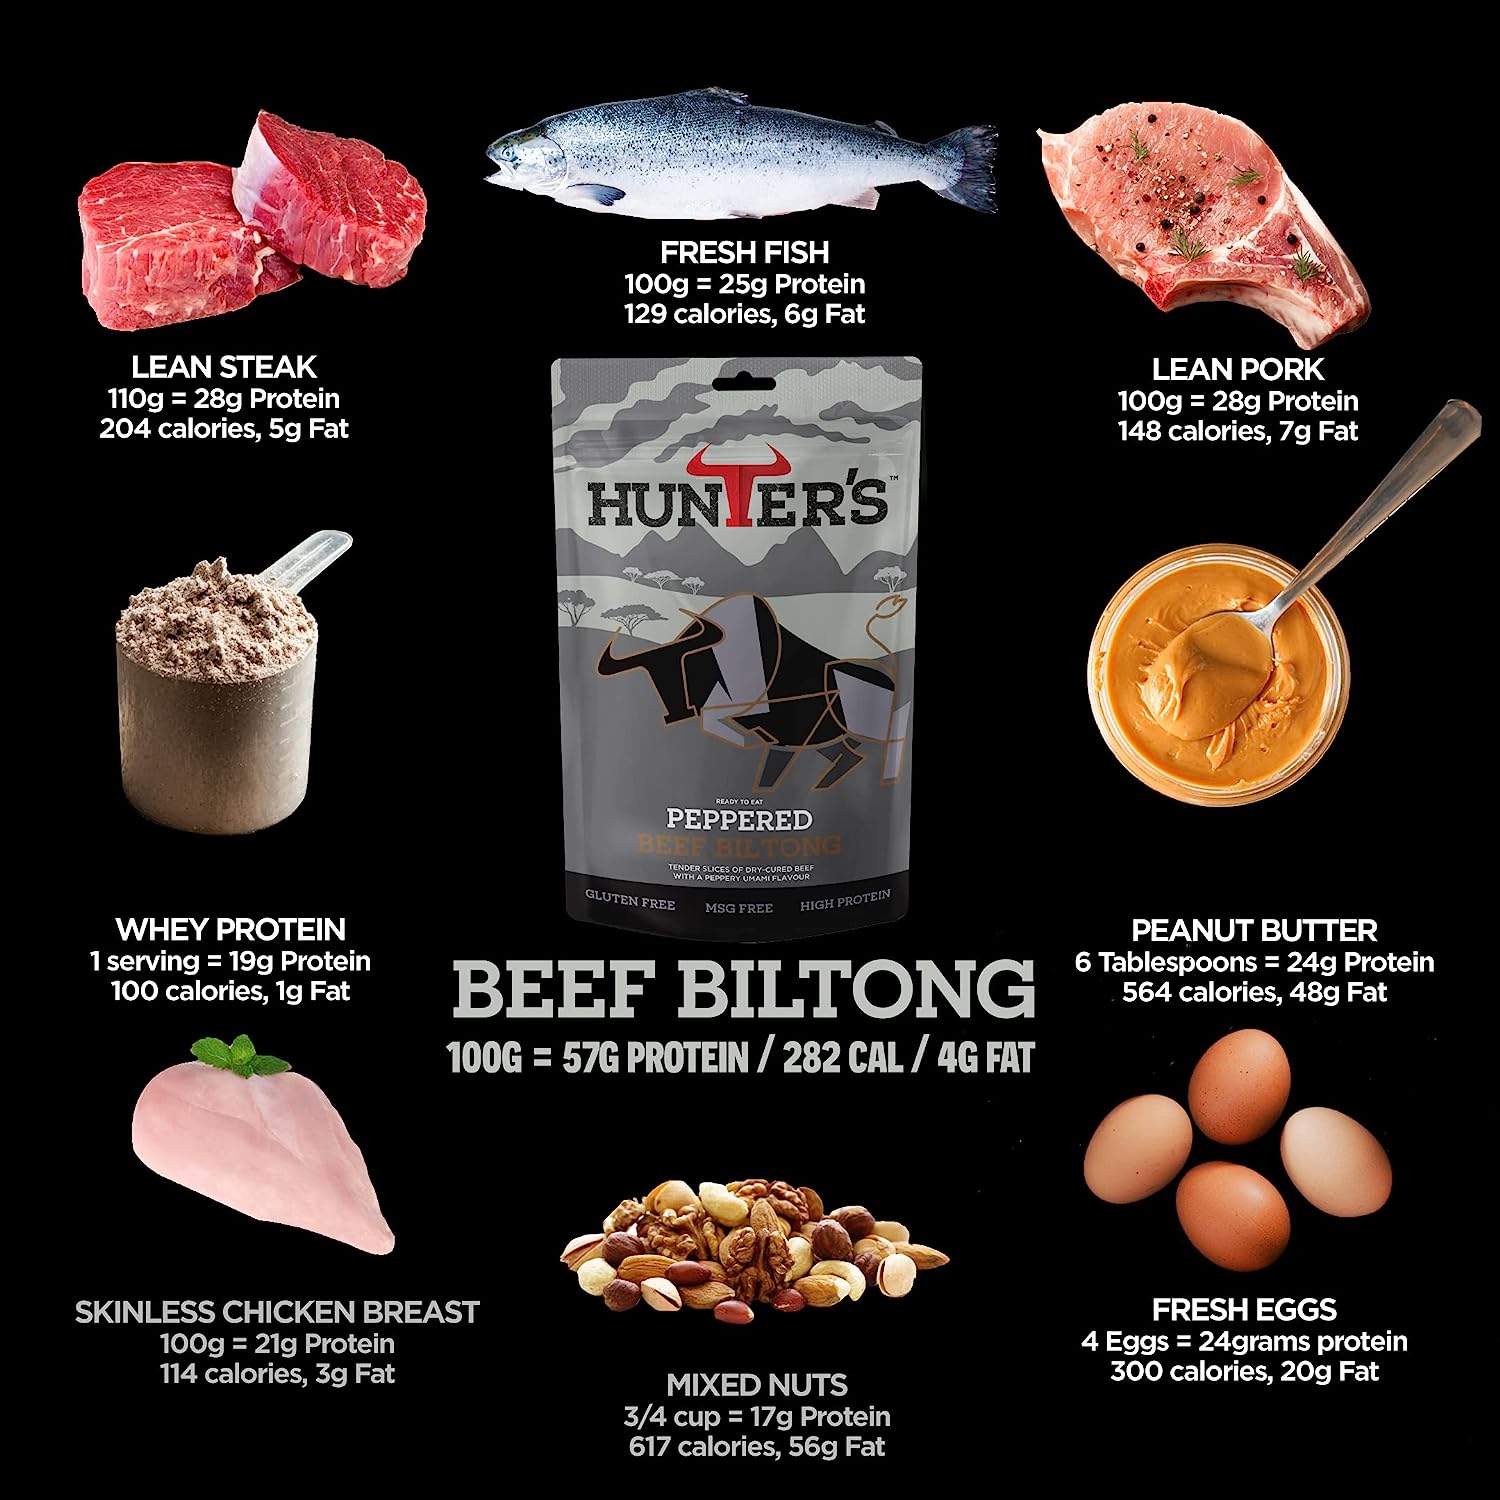 Hunters Biltong Peppered Beef Biltong 28g Pack of 10 High Protein - Review - Flavour